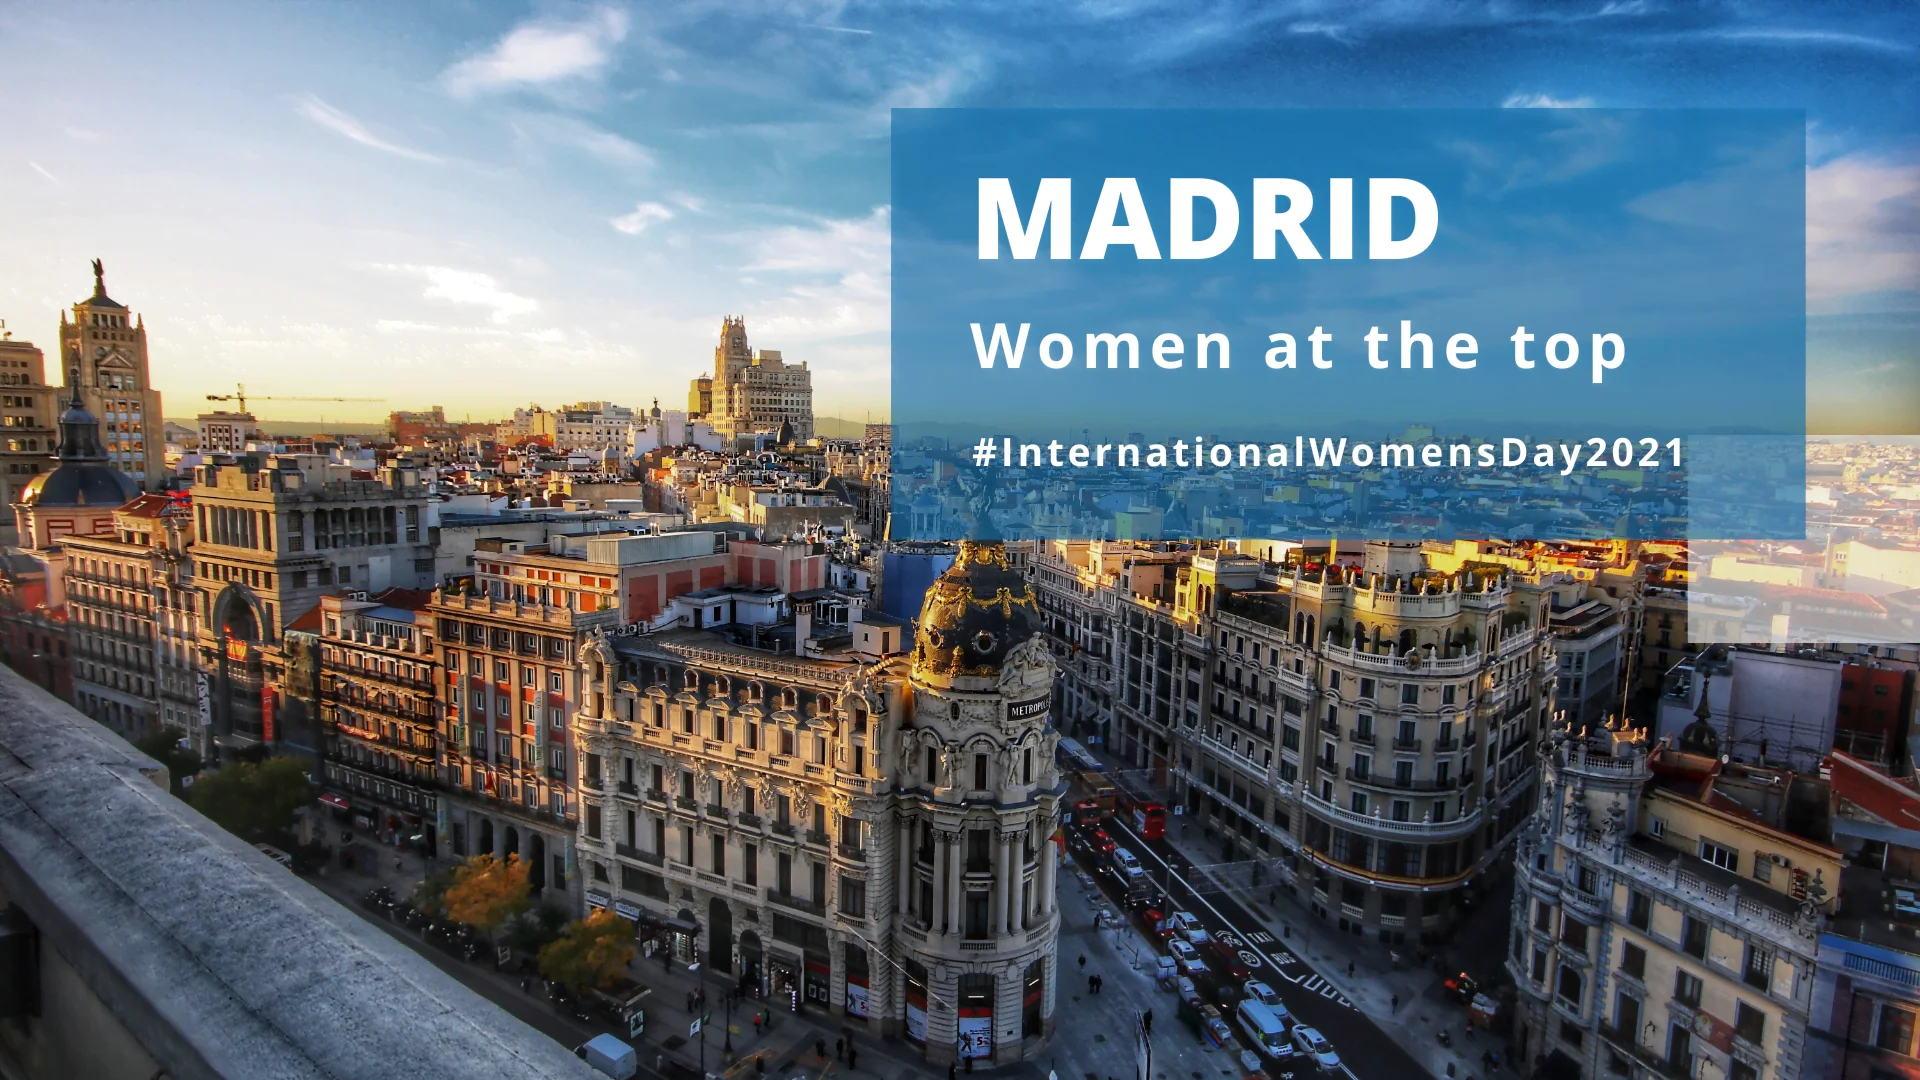 Madrid: Women at the top